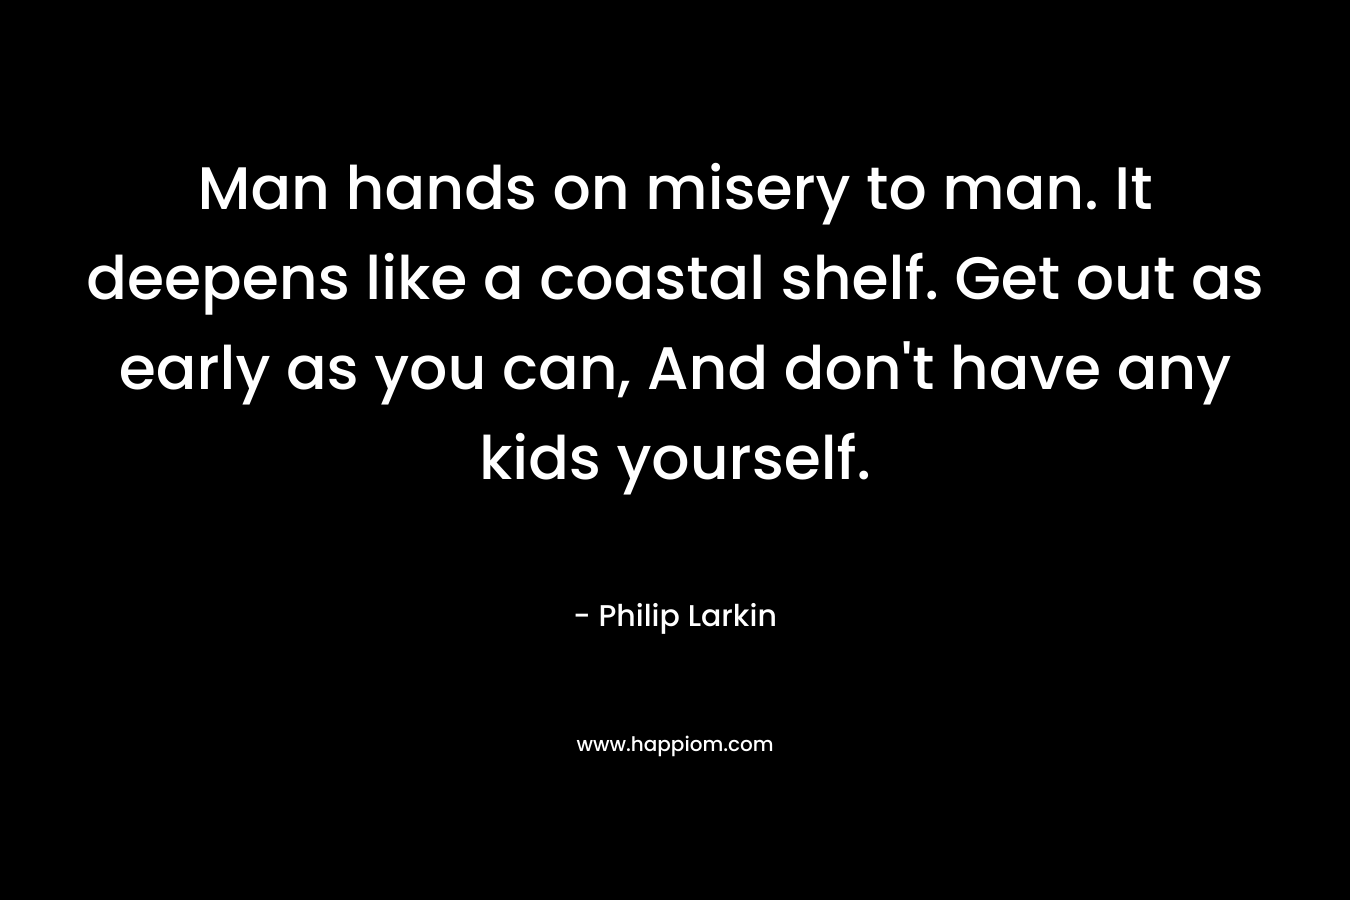 Man hands on misery to man. It deepens like a coastal shelf. Get out as early as you can, And don’t have any kids yourself. – Philip Larkin